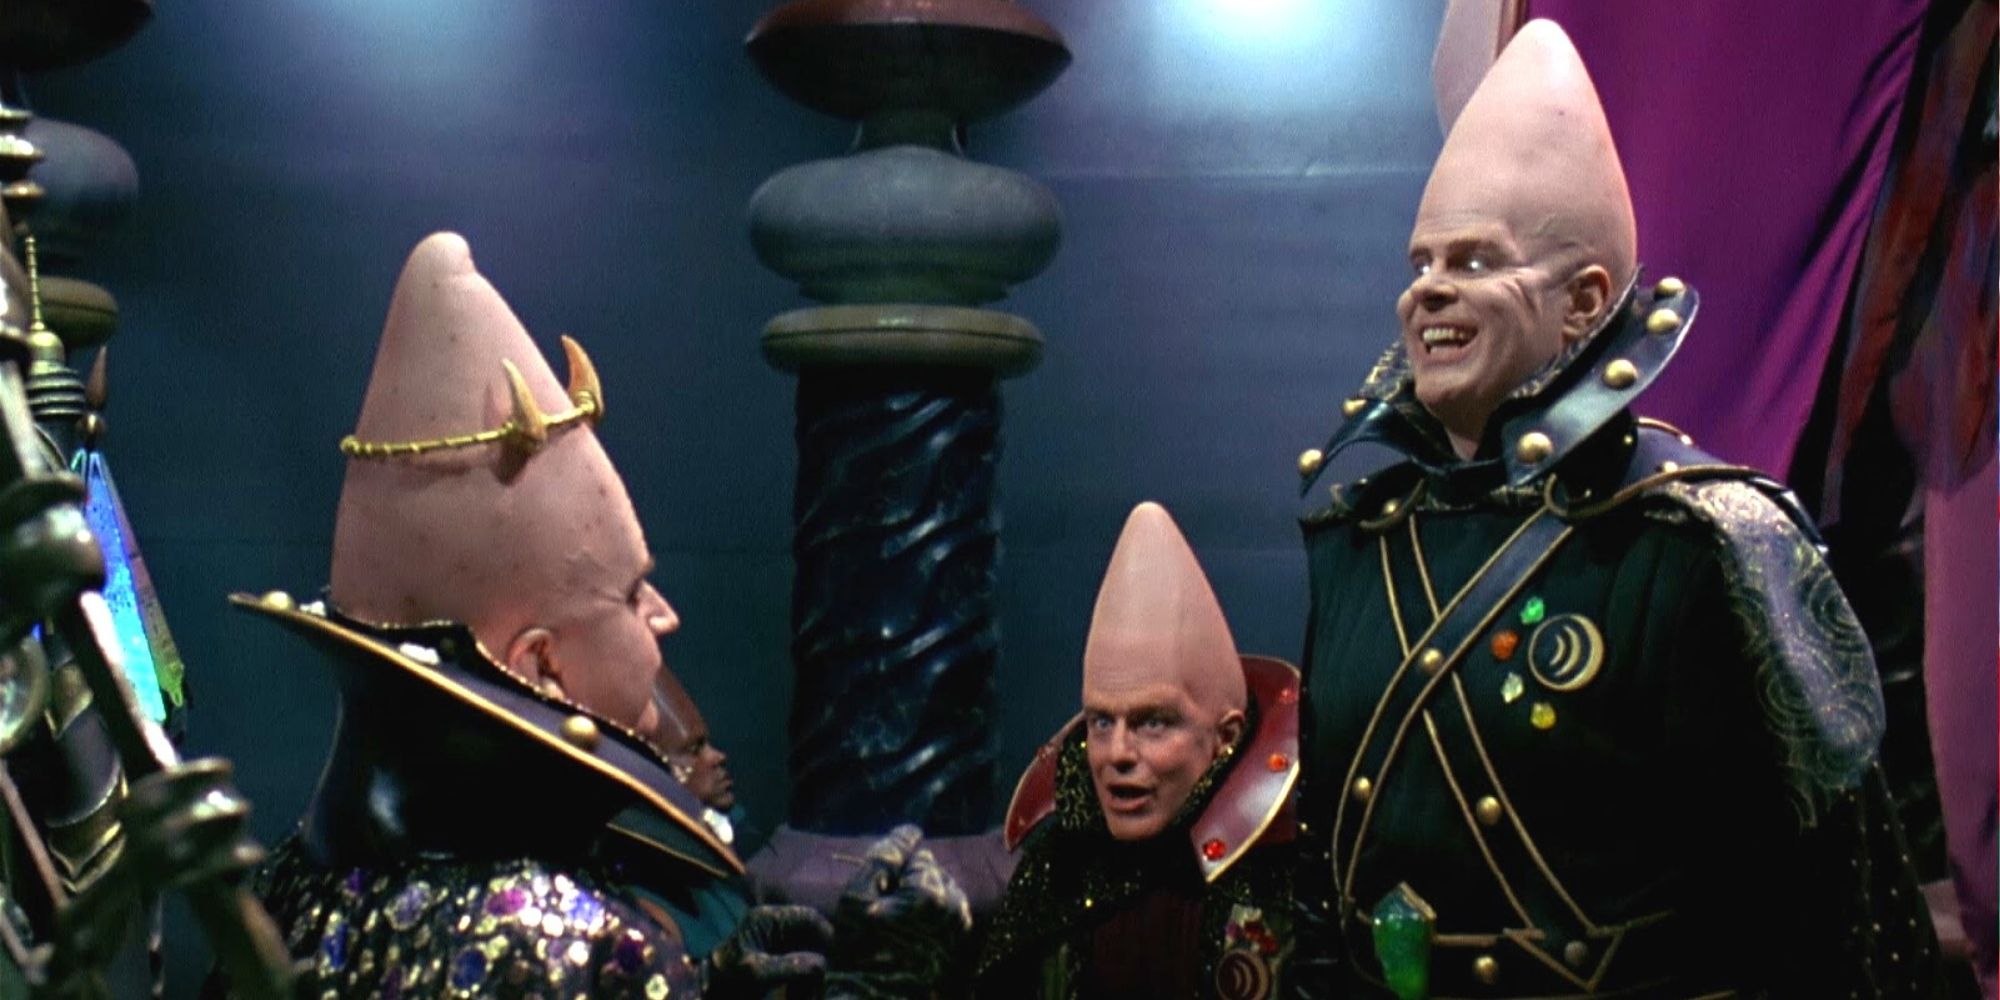 Coneheads Planet Leader On Thrown Wearing Crown Speaks To Coneheads Council